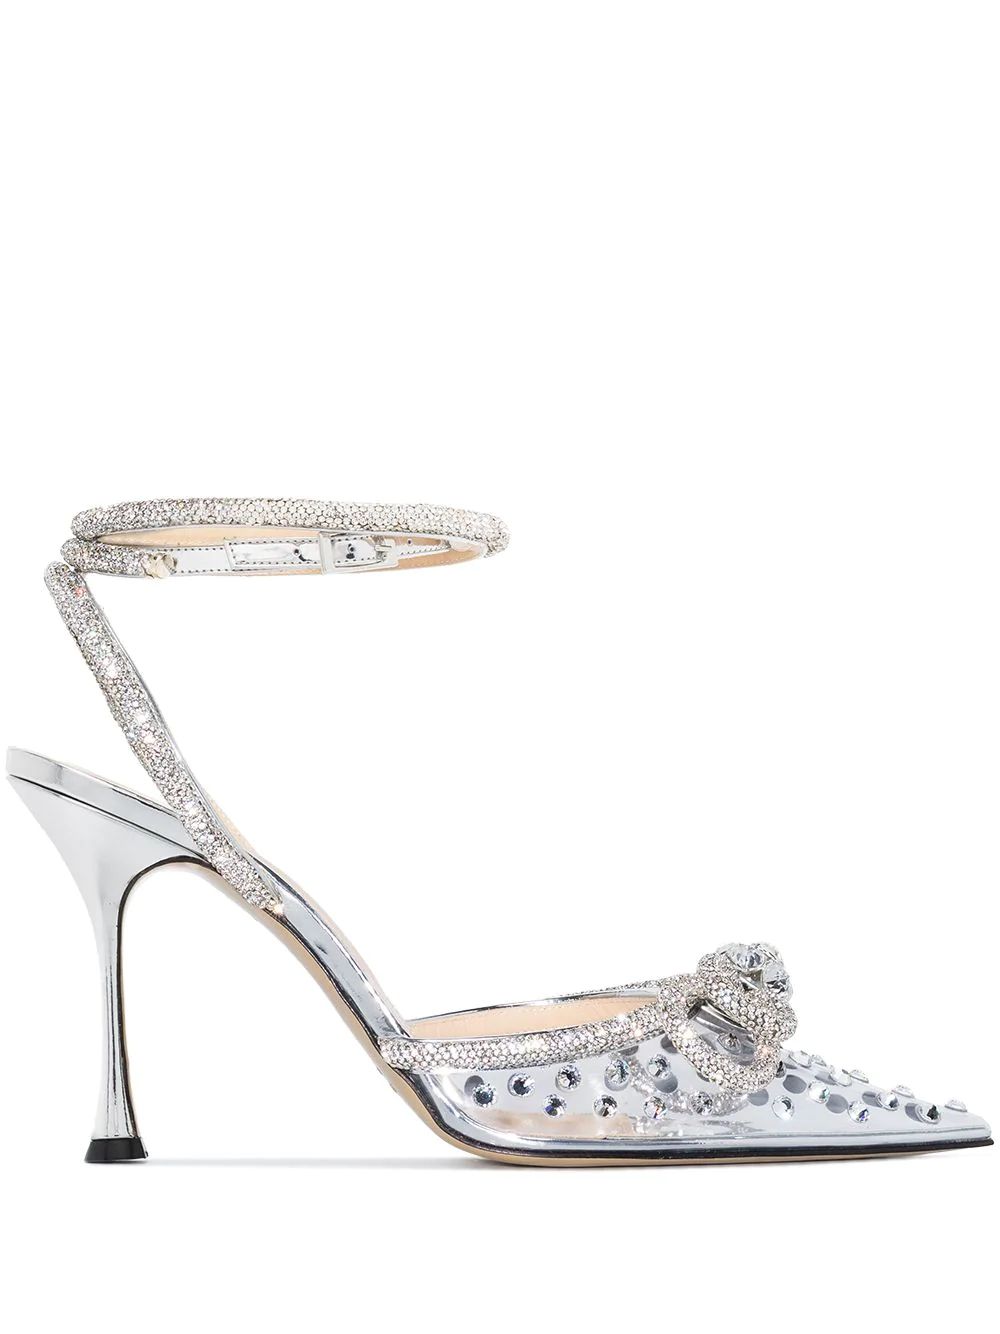 Double Bow 100mm crystal-embellished pumps | Farfetch Global